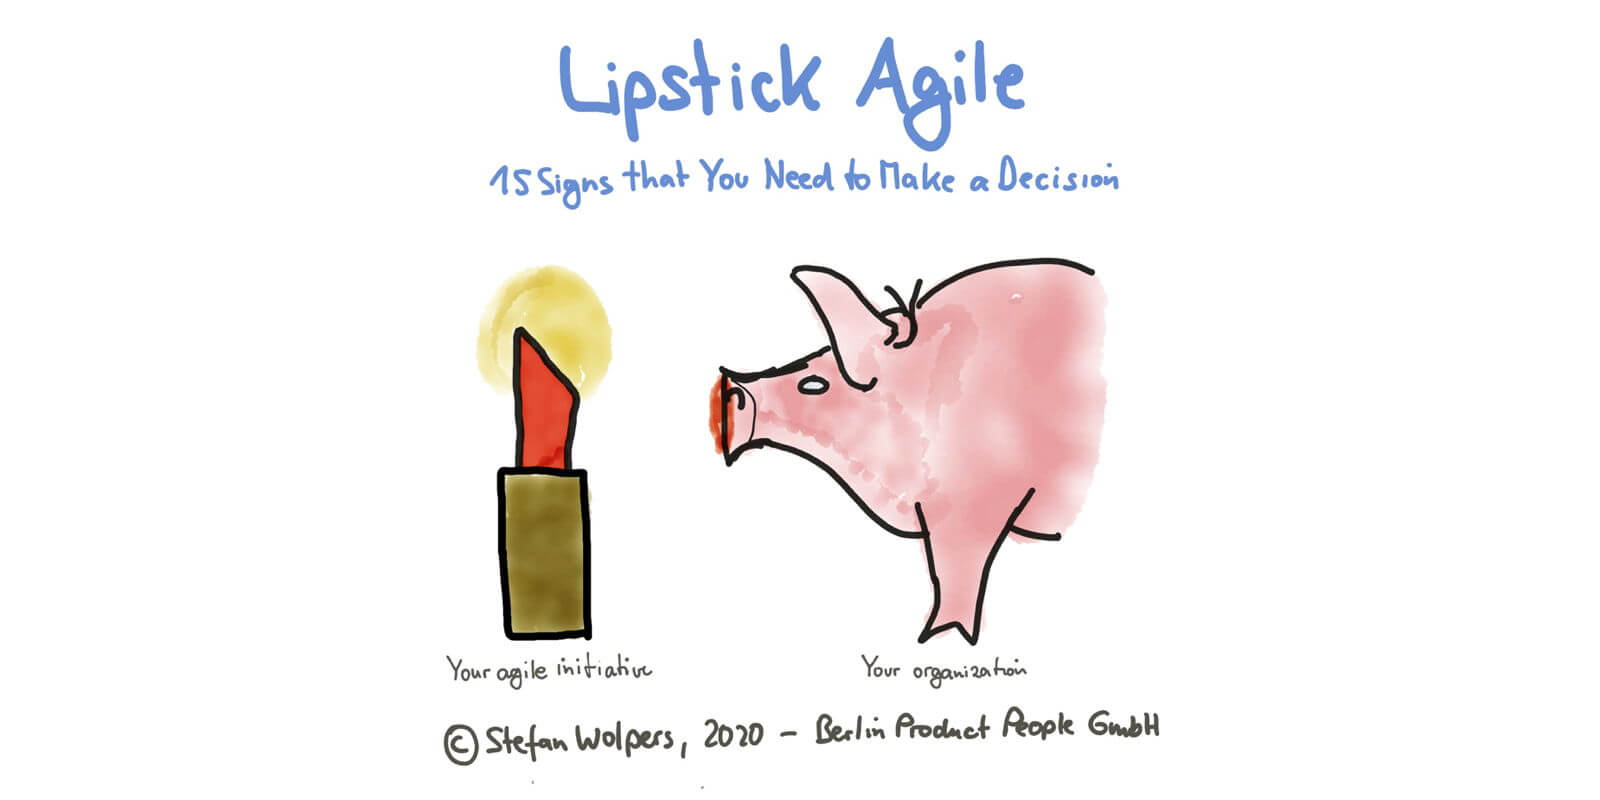 Lipstick Agile — 15 Signs You Probably Need a New Job or to Roll-up Your Proverbial Sleeves — Berlin Product People GmbH